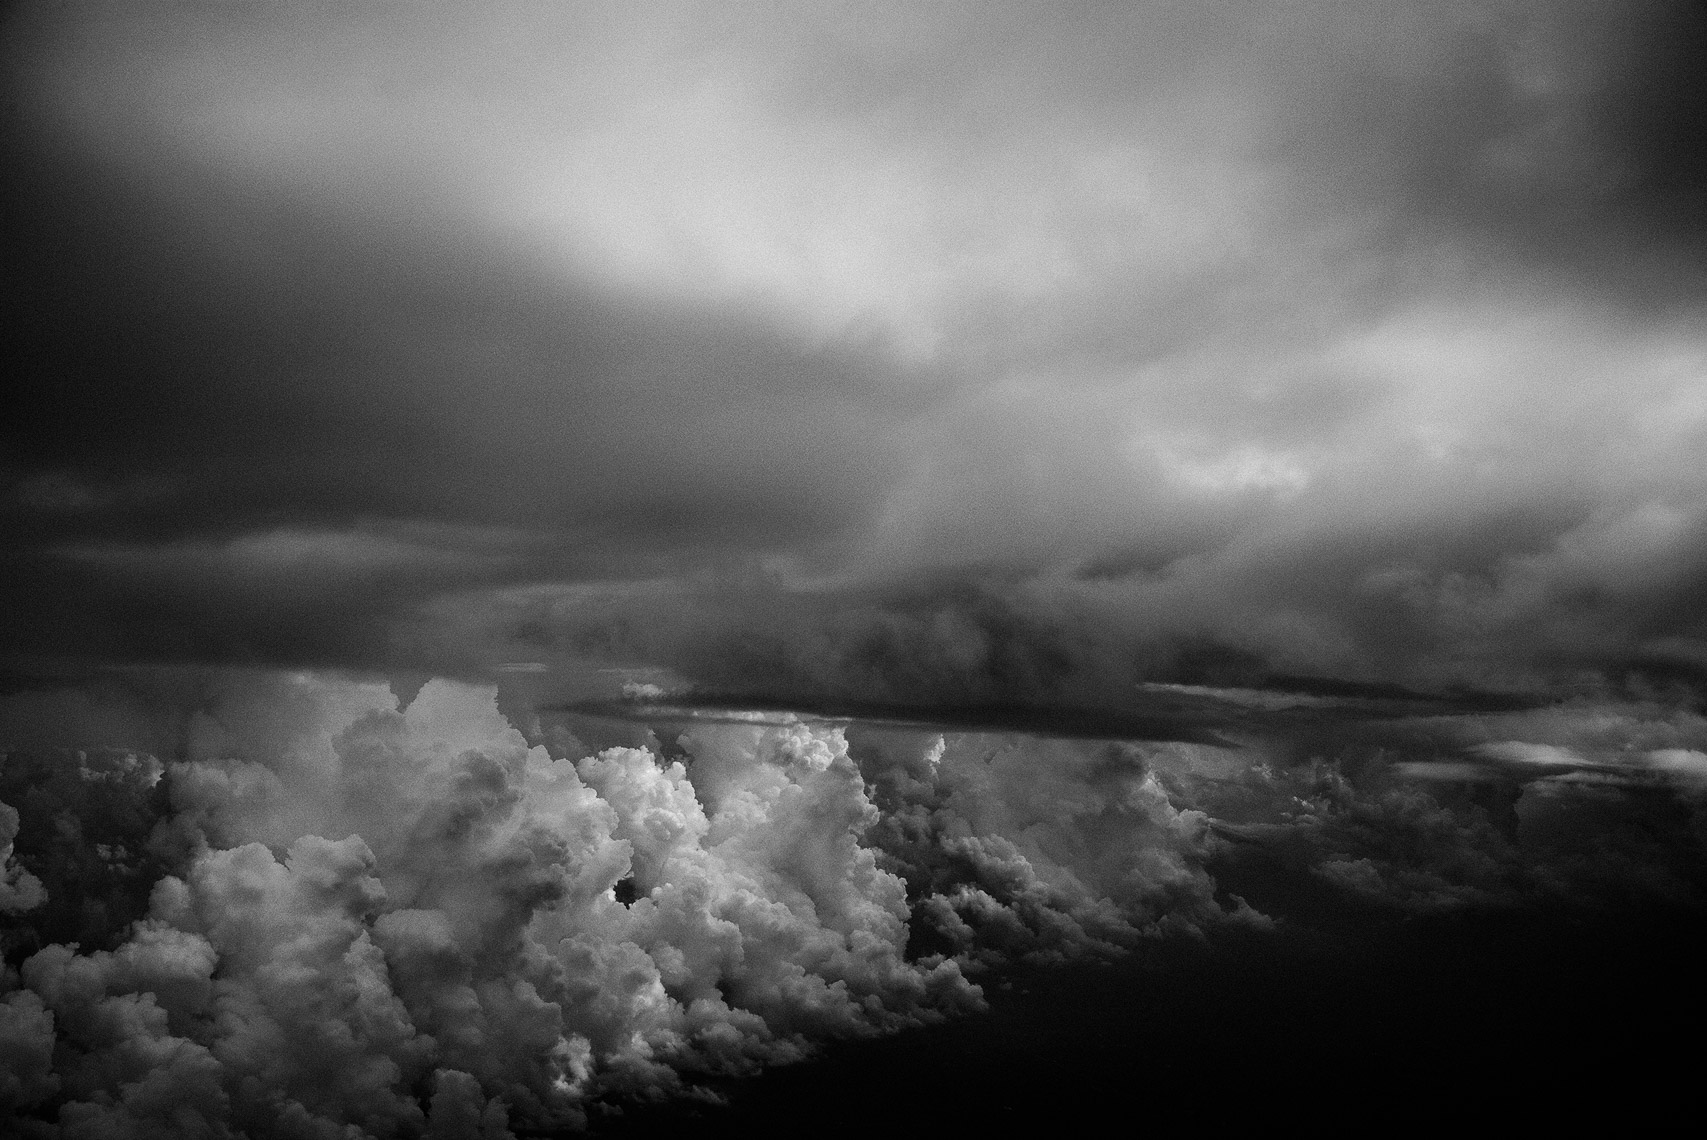 Clouds Full. Ground. Images of the personal interaction between travel and remaining still during my travels.